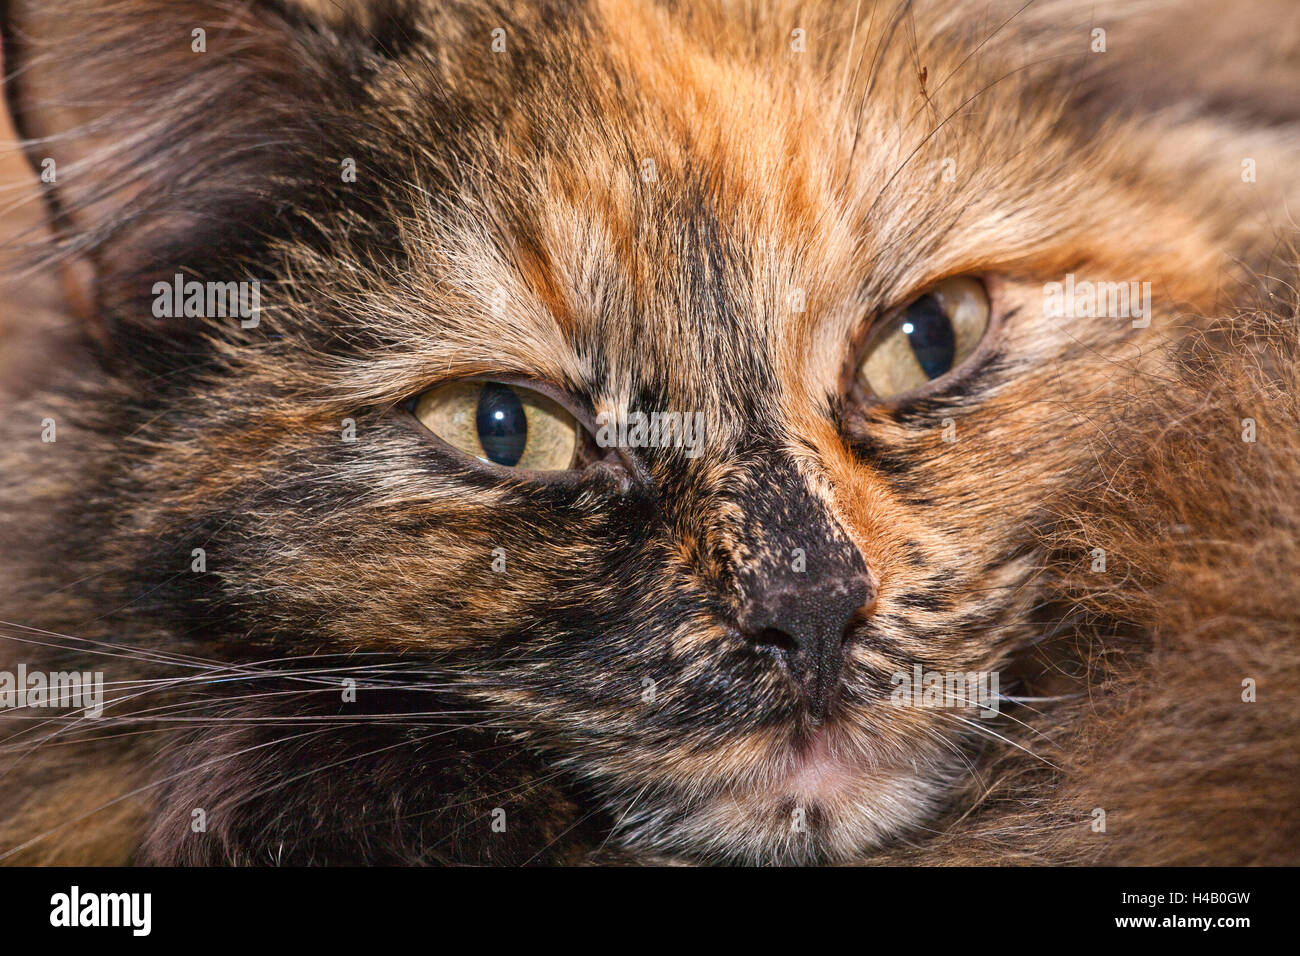 Portrait of a cat with golden brown fur Stock Photo